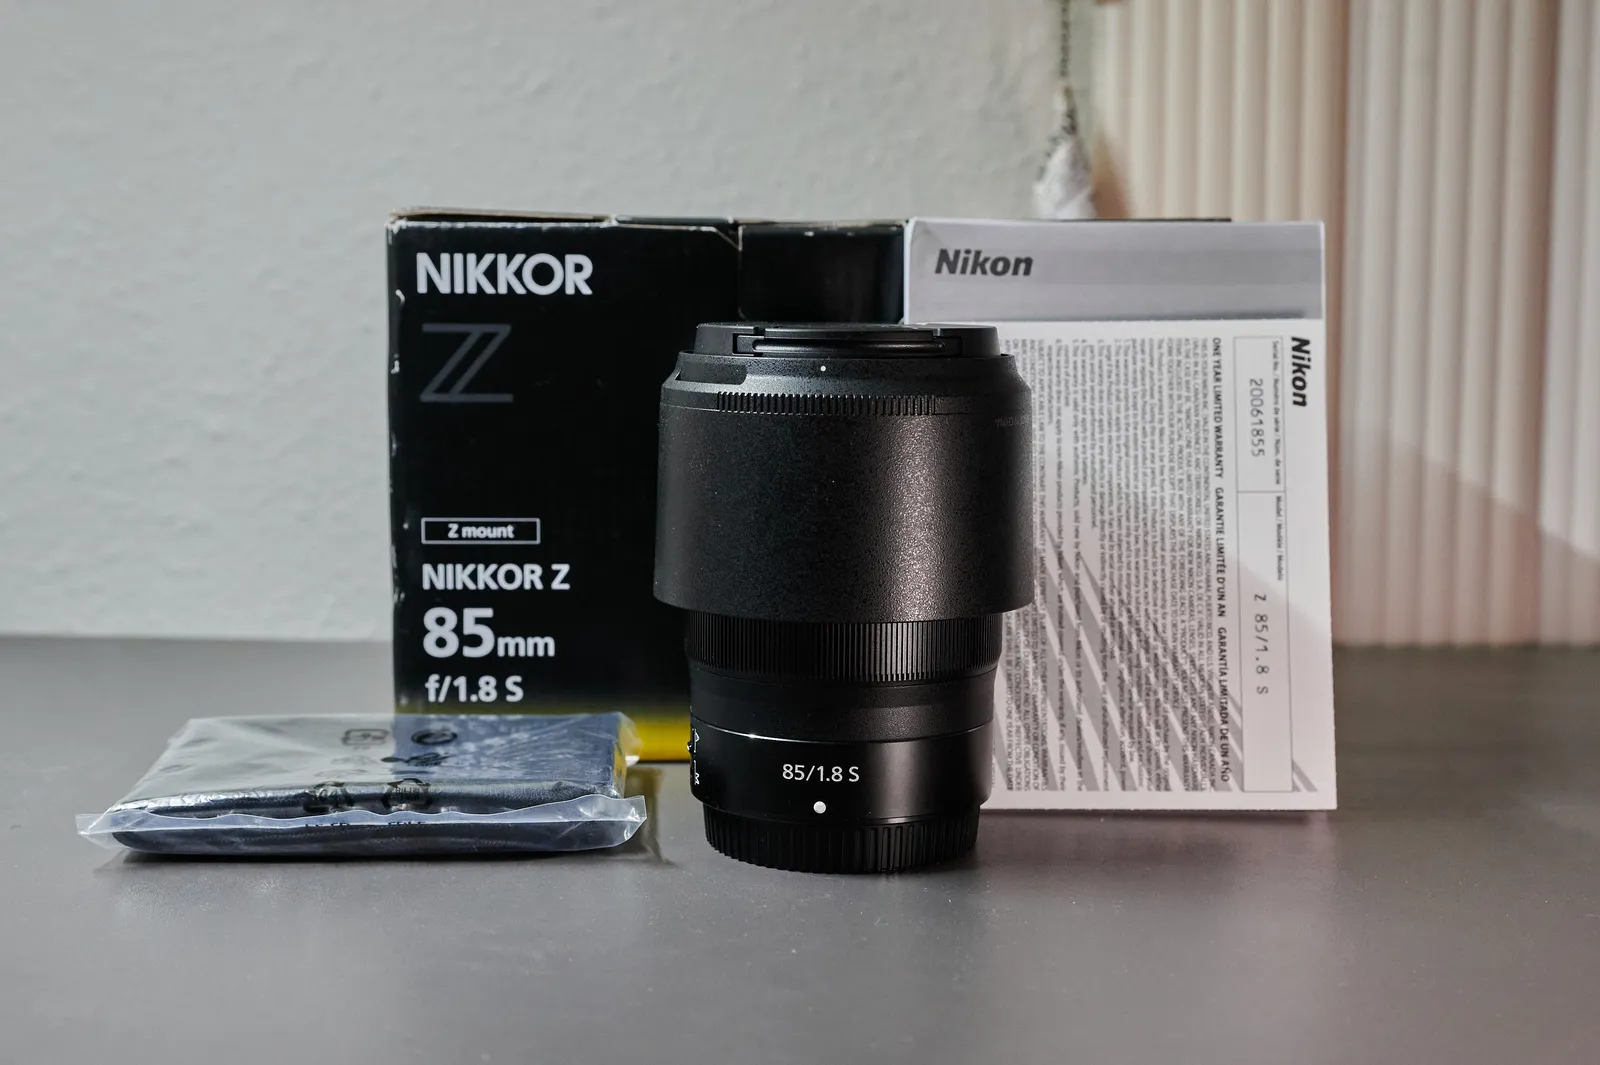 Nikon Nikkor Z 85mm f1.8 S Lens - with box From Tony's Gear Shop